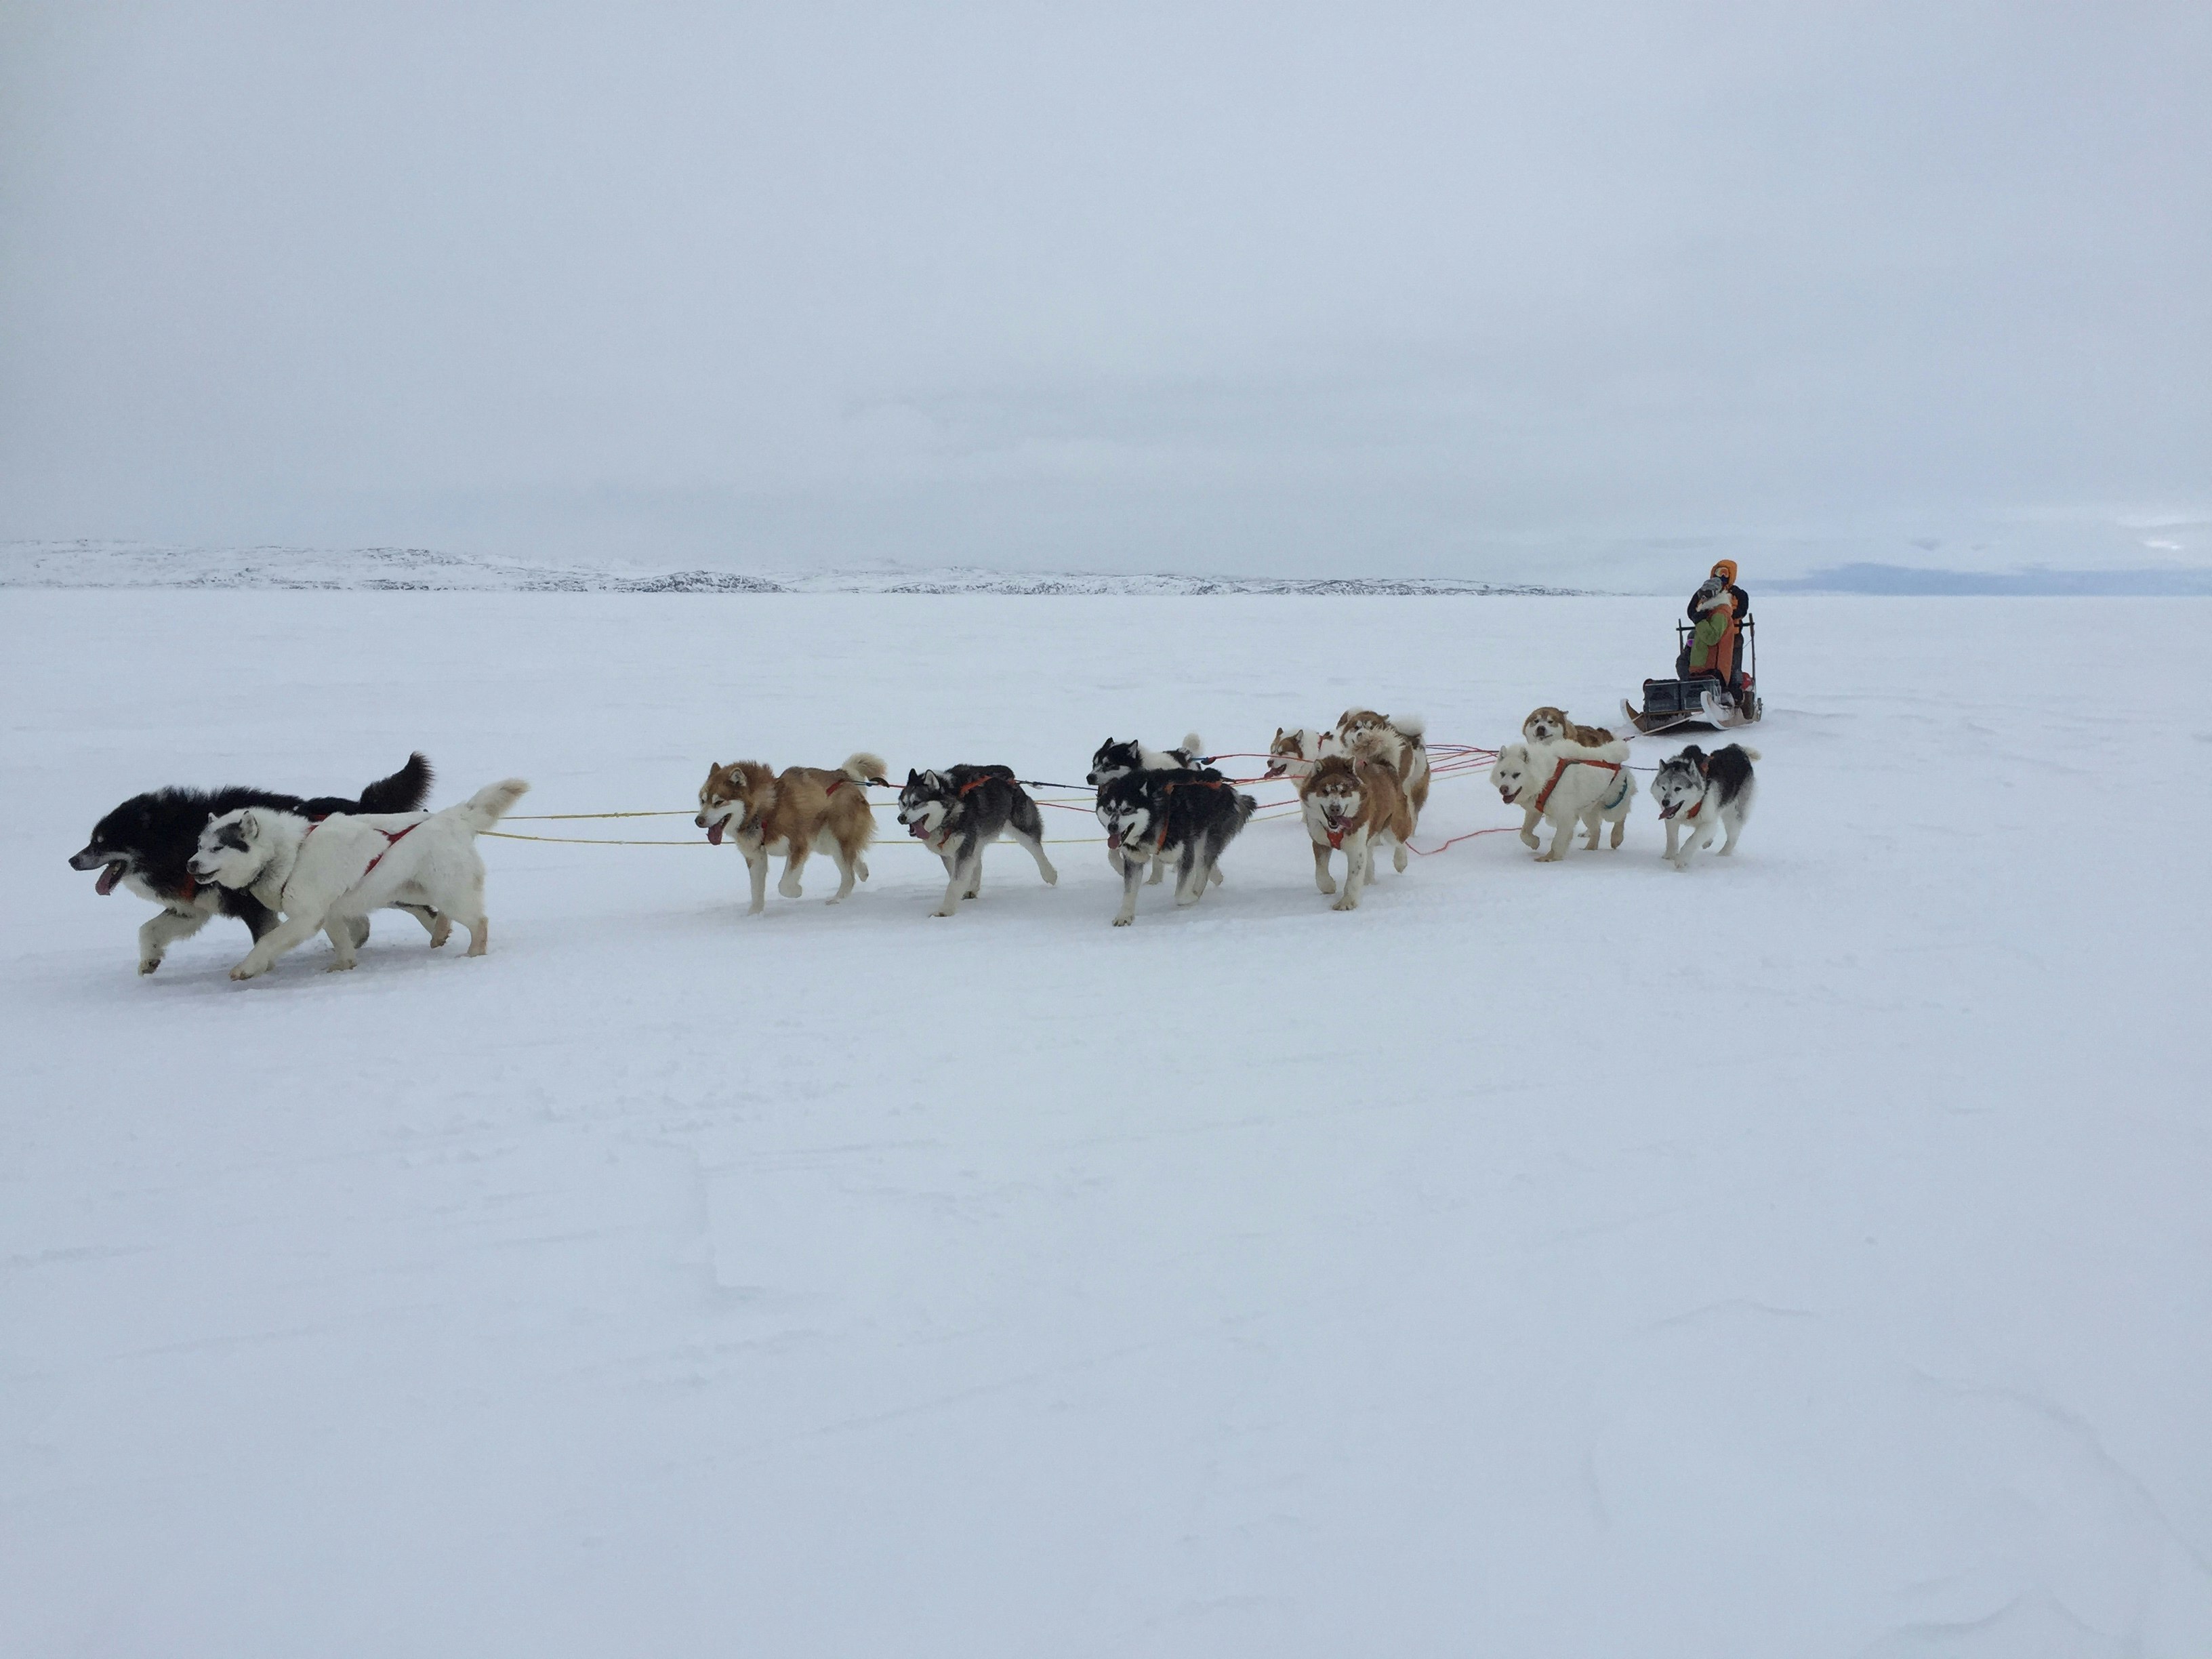 A musher is pulled by a team of sled dogs across a vast expanse of flat, snow-covered terrain.